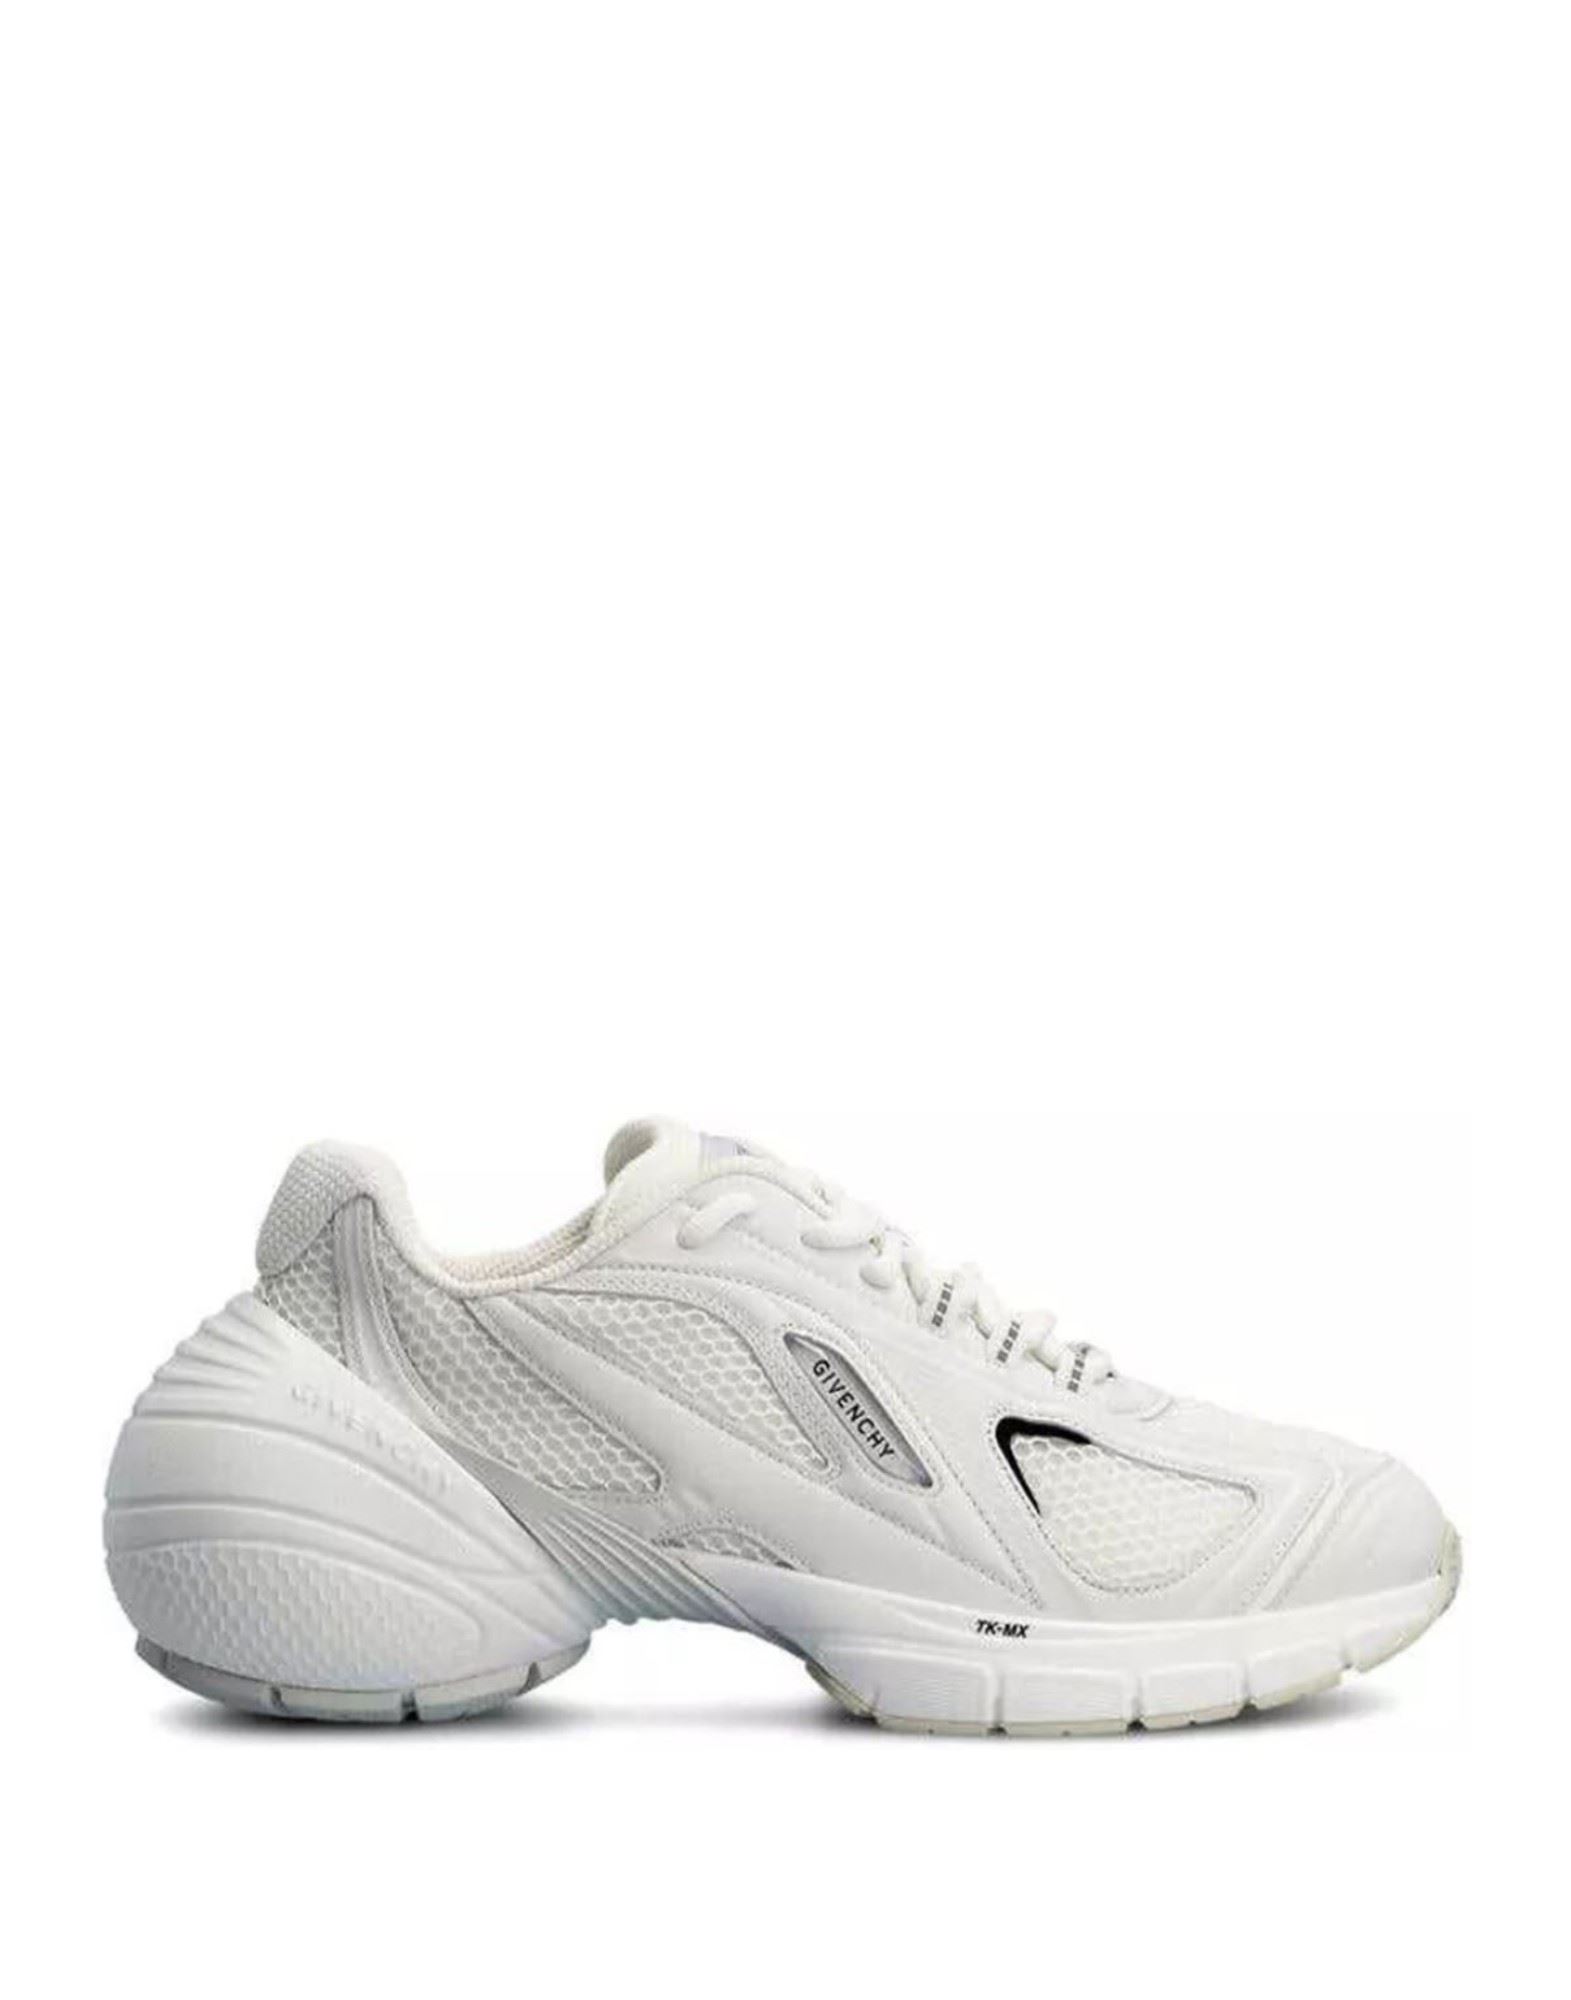 GIVENCHY Sneakers Unisex Weiß von GIVENCHY